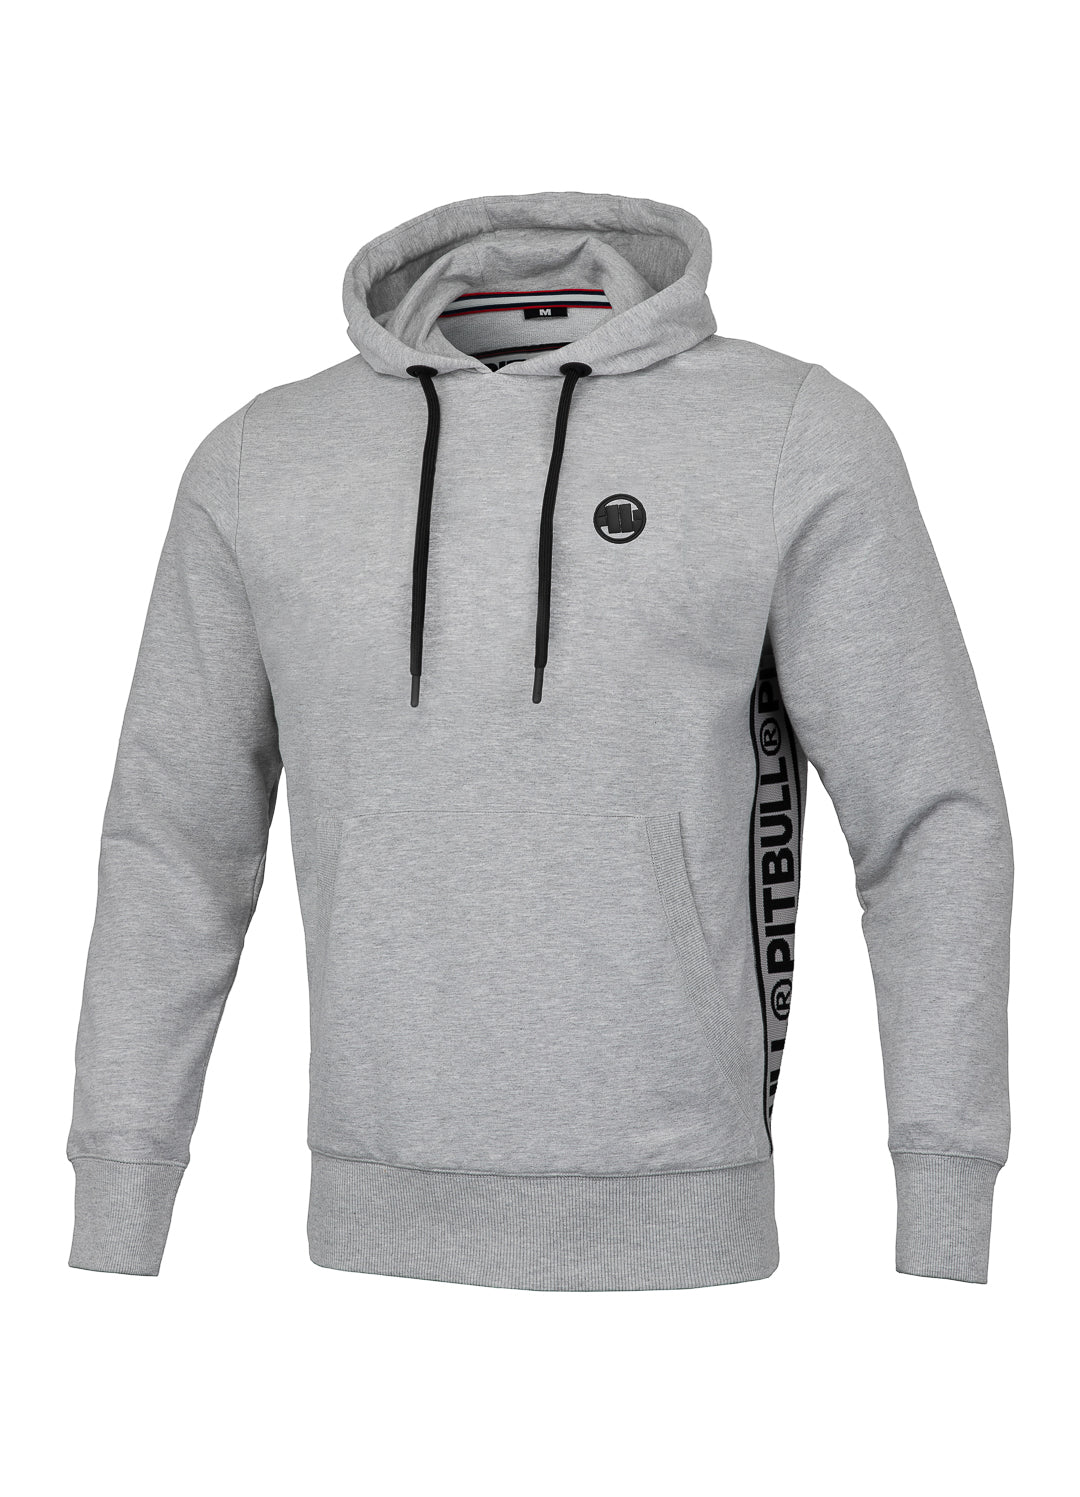 Hoodie French Terry HINSON Grey - Pitbull West Coast International Store 